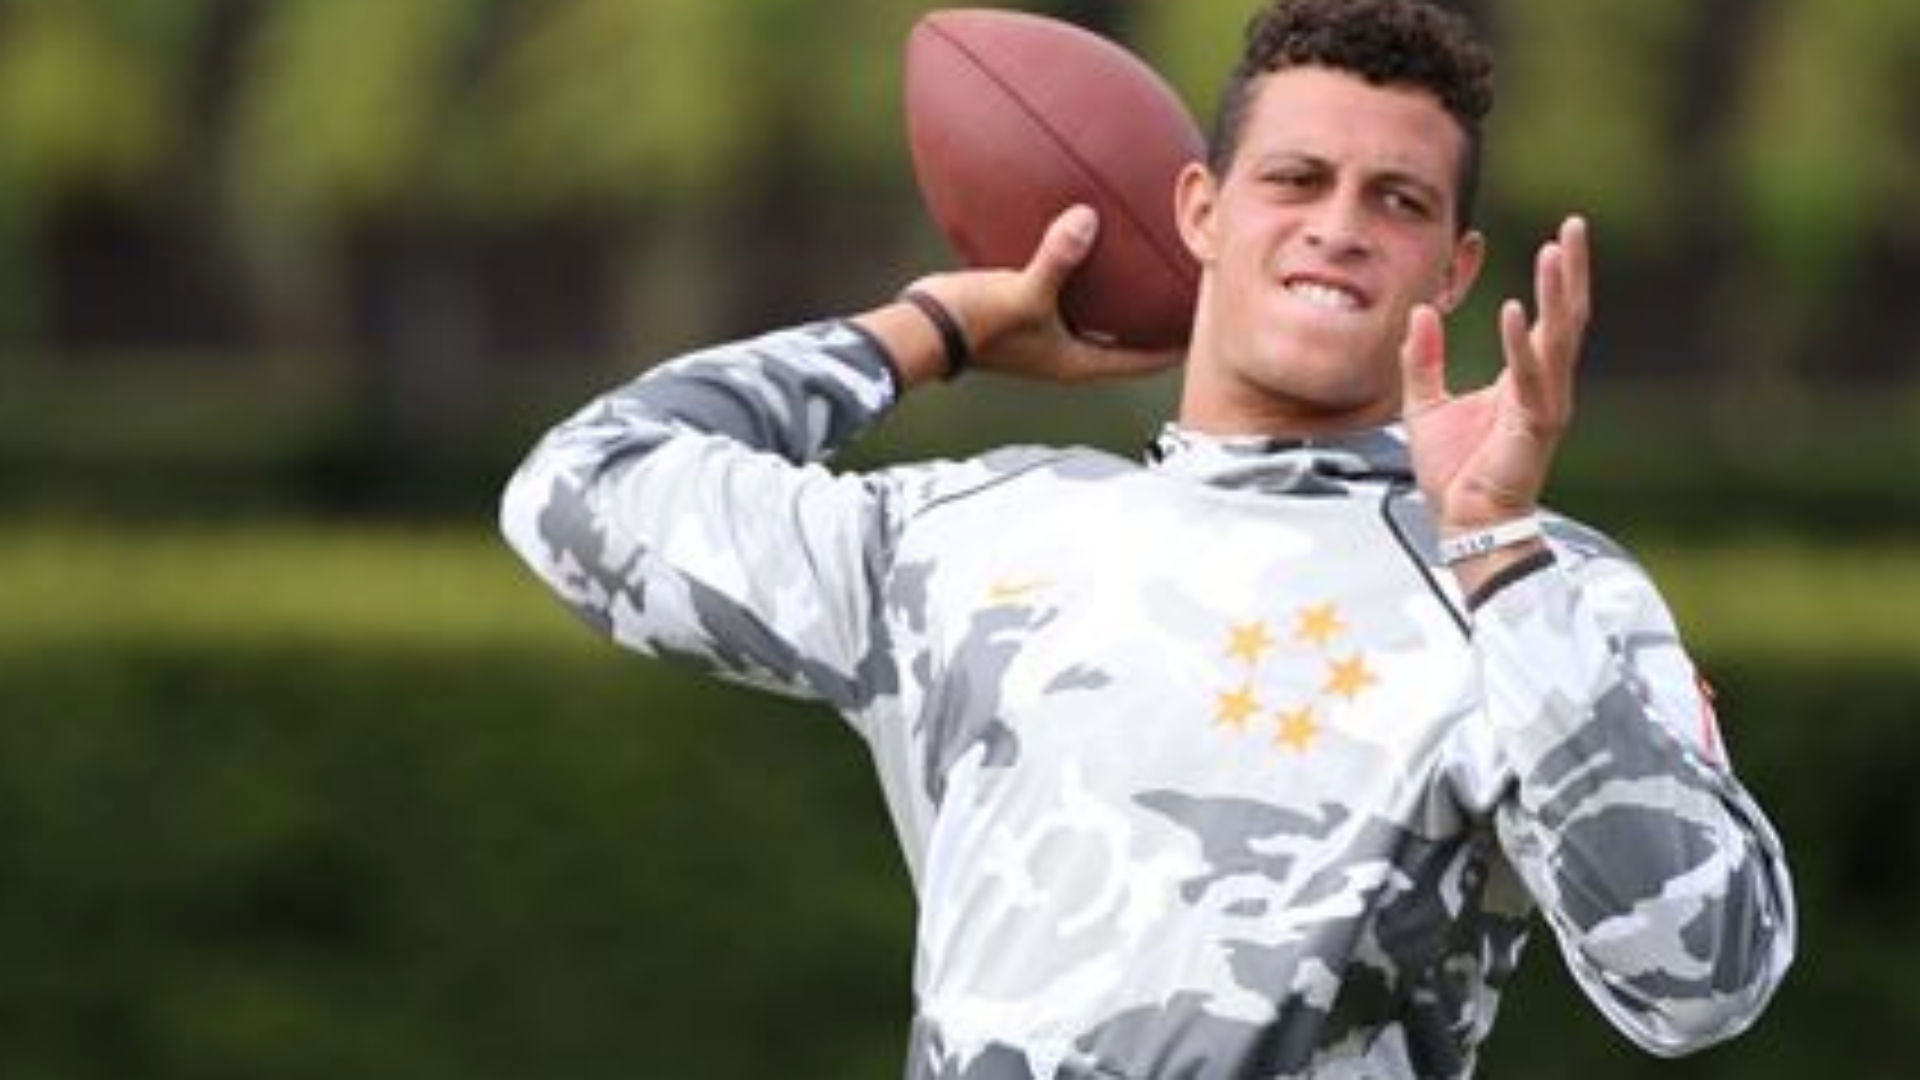 Elite 11 QB Feleipe Franks commits to Florida less than a week after LSU decommitment ...